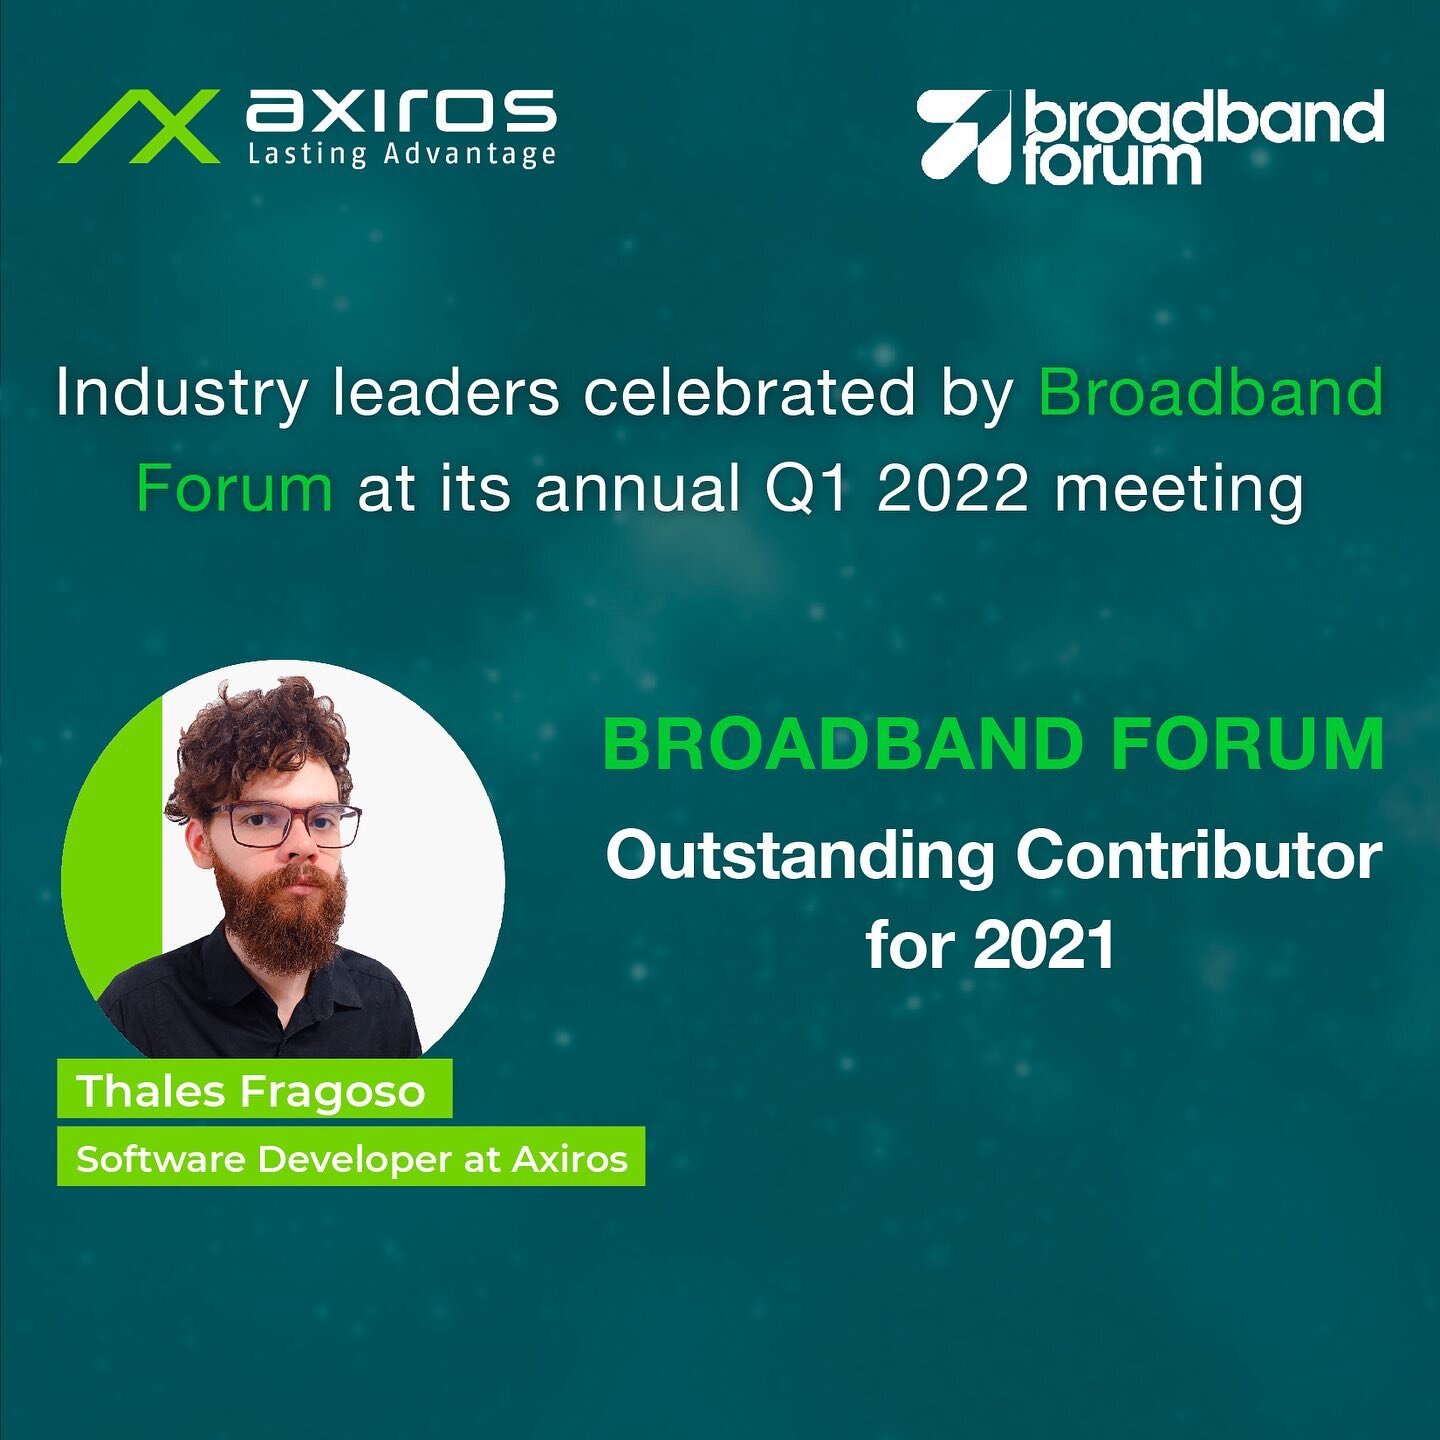 Industry leaders celebrated by #BroadbandForum at its annual Q1 2022 meeting!

So proud of valued members like Thales Fragoso from #Axiros who was recognized and honored with the Outstanding Contribution Award by BBF. Congratulations!

➡️ http://ow.l